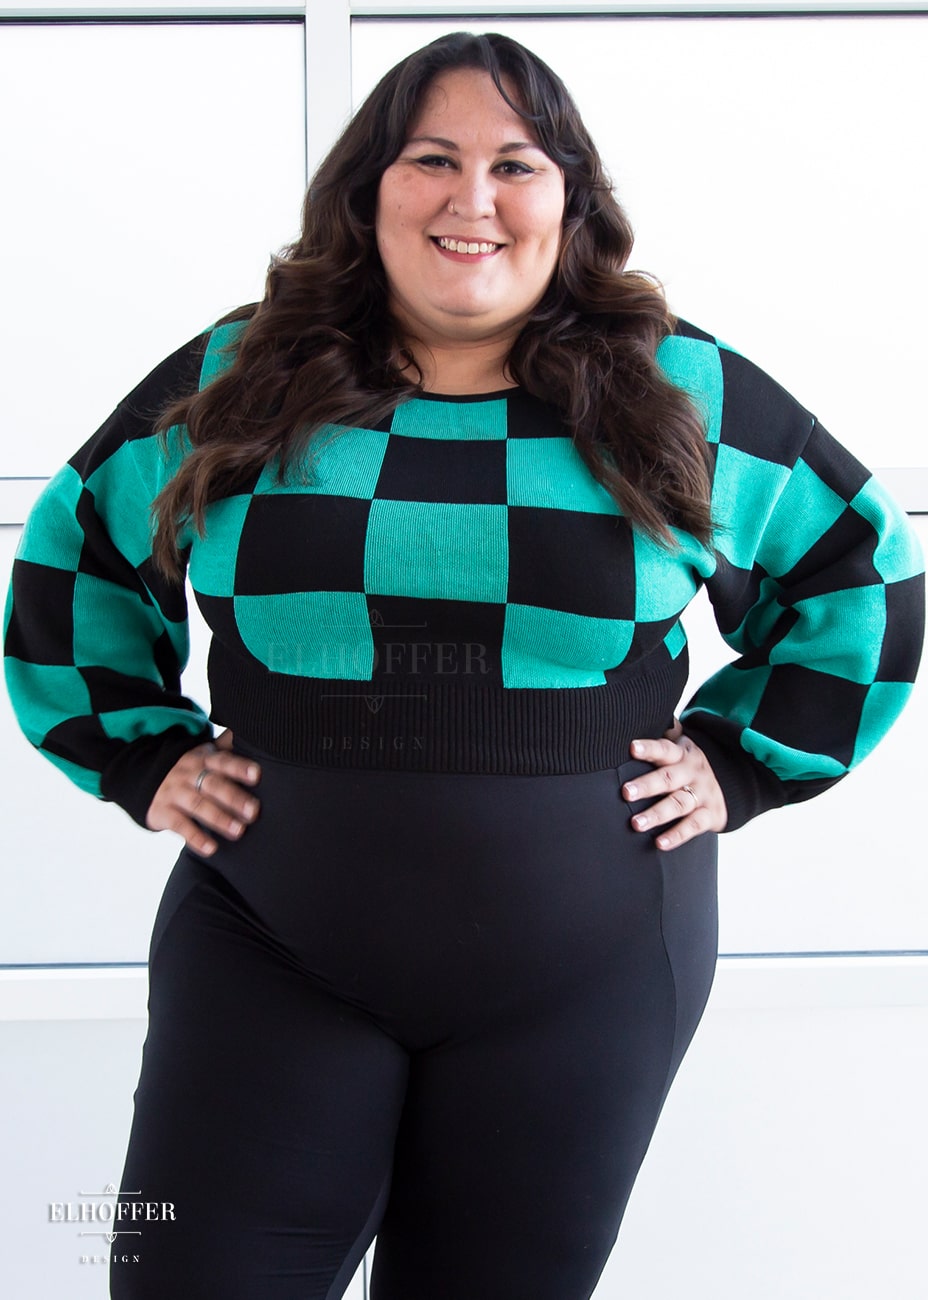 Alysia, a sun kissed skin 2xl model with long dark brown curly hair, is smiling while wearing a cropped oversize sweater with a black and green chessboard pattern and long billowing sleeves.  She paired the sweater with black leggings.